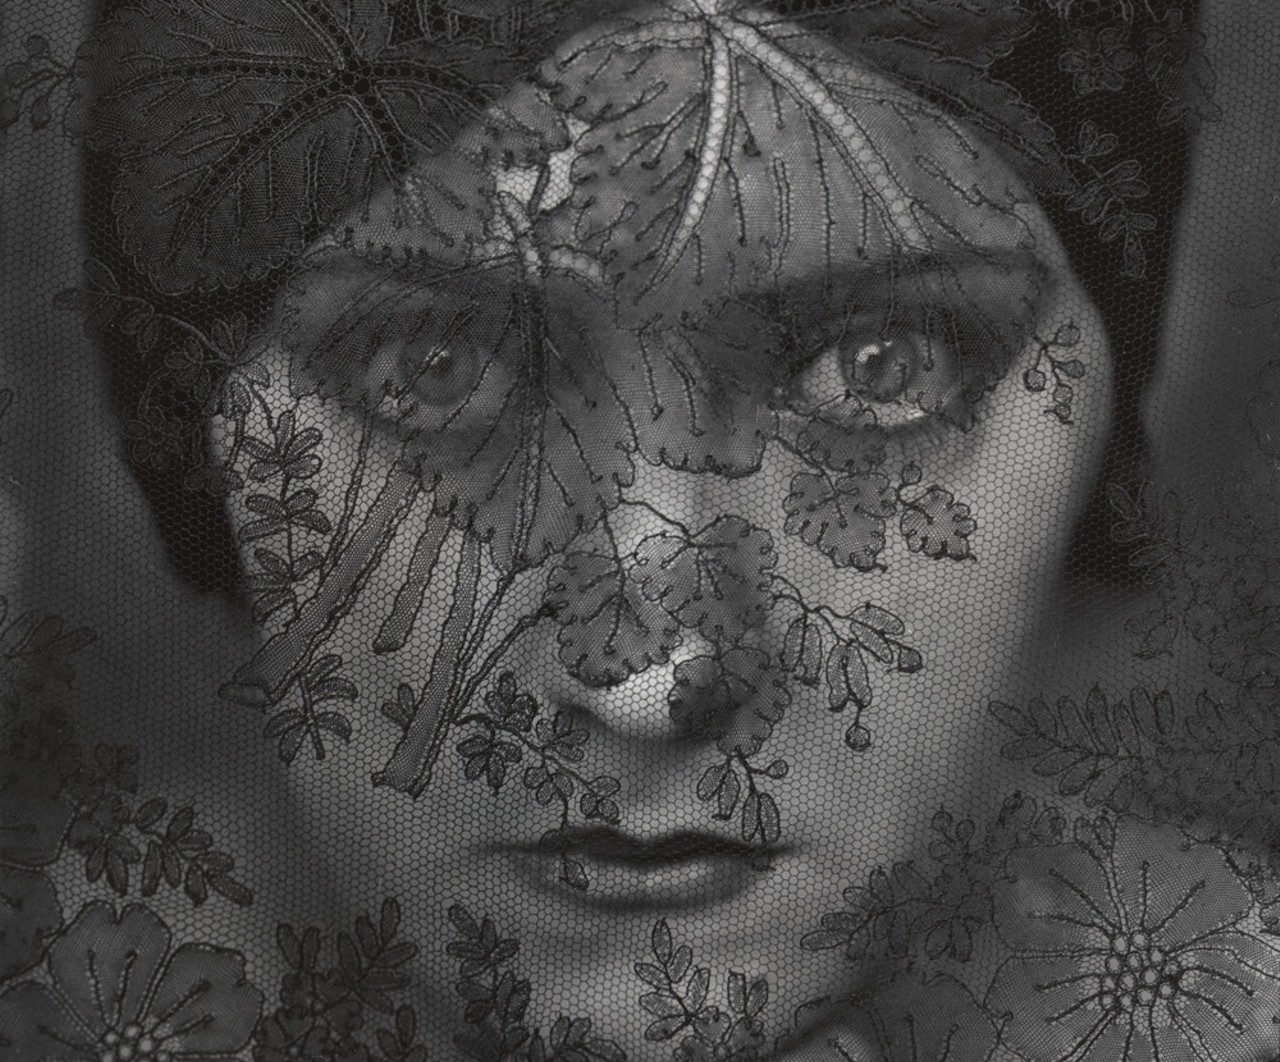 
Sept. 20 through Jan. 12, 2020   
Edward Steichen:  In Exaltation of Flowers
Mennello Museum of American Art, mennellomuseum.org, $5; Orlando Museum of Art,  omart.org, $15   
Edward Steichen grew into his full powers late in life, serving as director of photography at the Museum of Modern Art for 15 years, where he presented the legendary group show The Family of Man. But this exhibition is an intriguing look at the making of the preternaturally accomplished photographer, showing work from a time before his stern modernism took complete hold &#150; and before he put painting aside to focus on the camera. The massive panels of "In Exaltation of Flowers" are at OMA, seven vividly romantic portraits commissioned as "floral personifications" by a wealthy New York family, while 20 photographs chosen for their close association with the murals hang at the MMAA. (For full image credits on art above and left, see page 9)   
Photo Credit: Edward Steichen, "Gloria Swanson," (1924). Gelatin silver print, 9 7/16 x 7 1/2 inches. Lent by The Metropolitan Museum of Art, Gift of Grace M. Mayer, 1989. &copy; 2019 The Estate of Edward Steichen/Artists Rights Society, New York. Photo: Art Resource